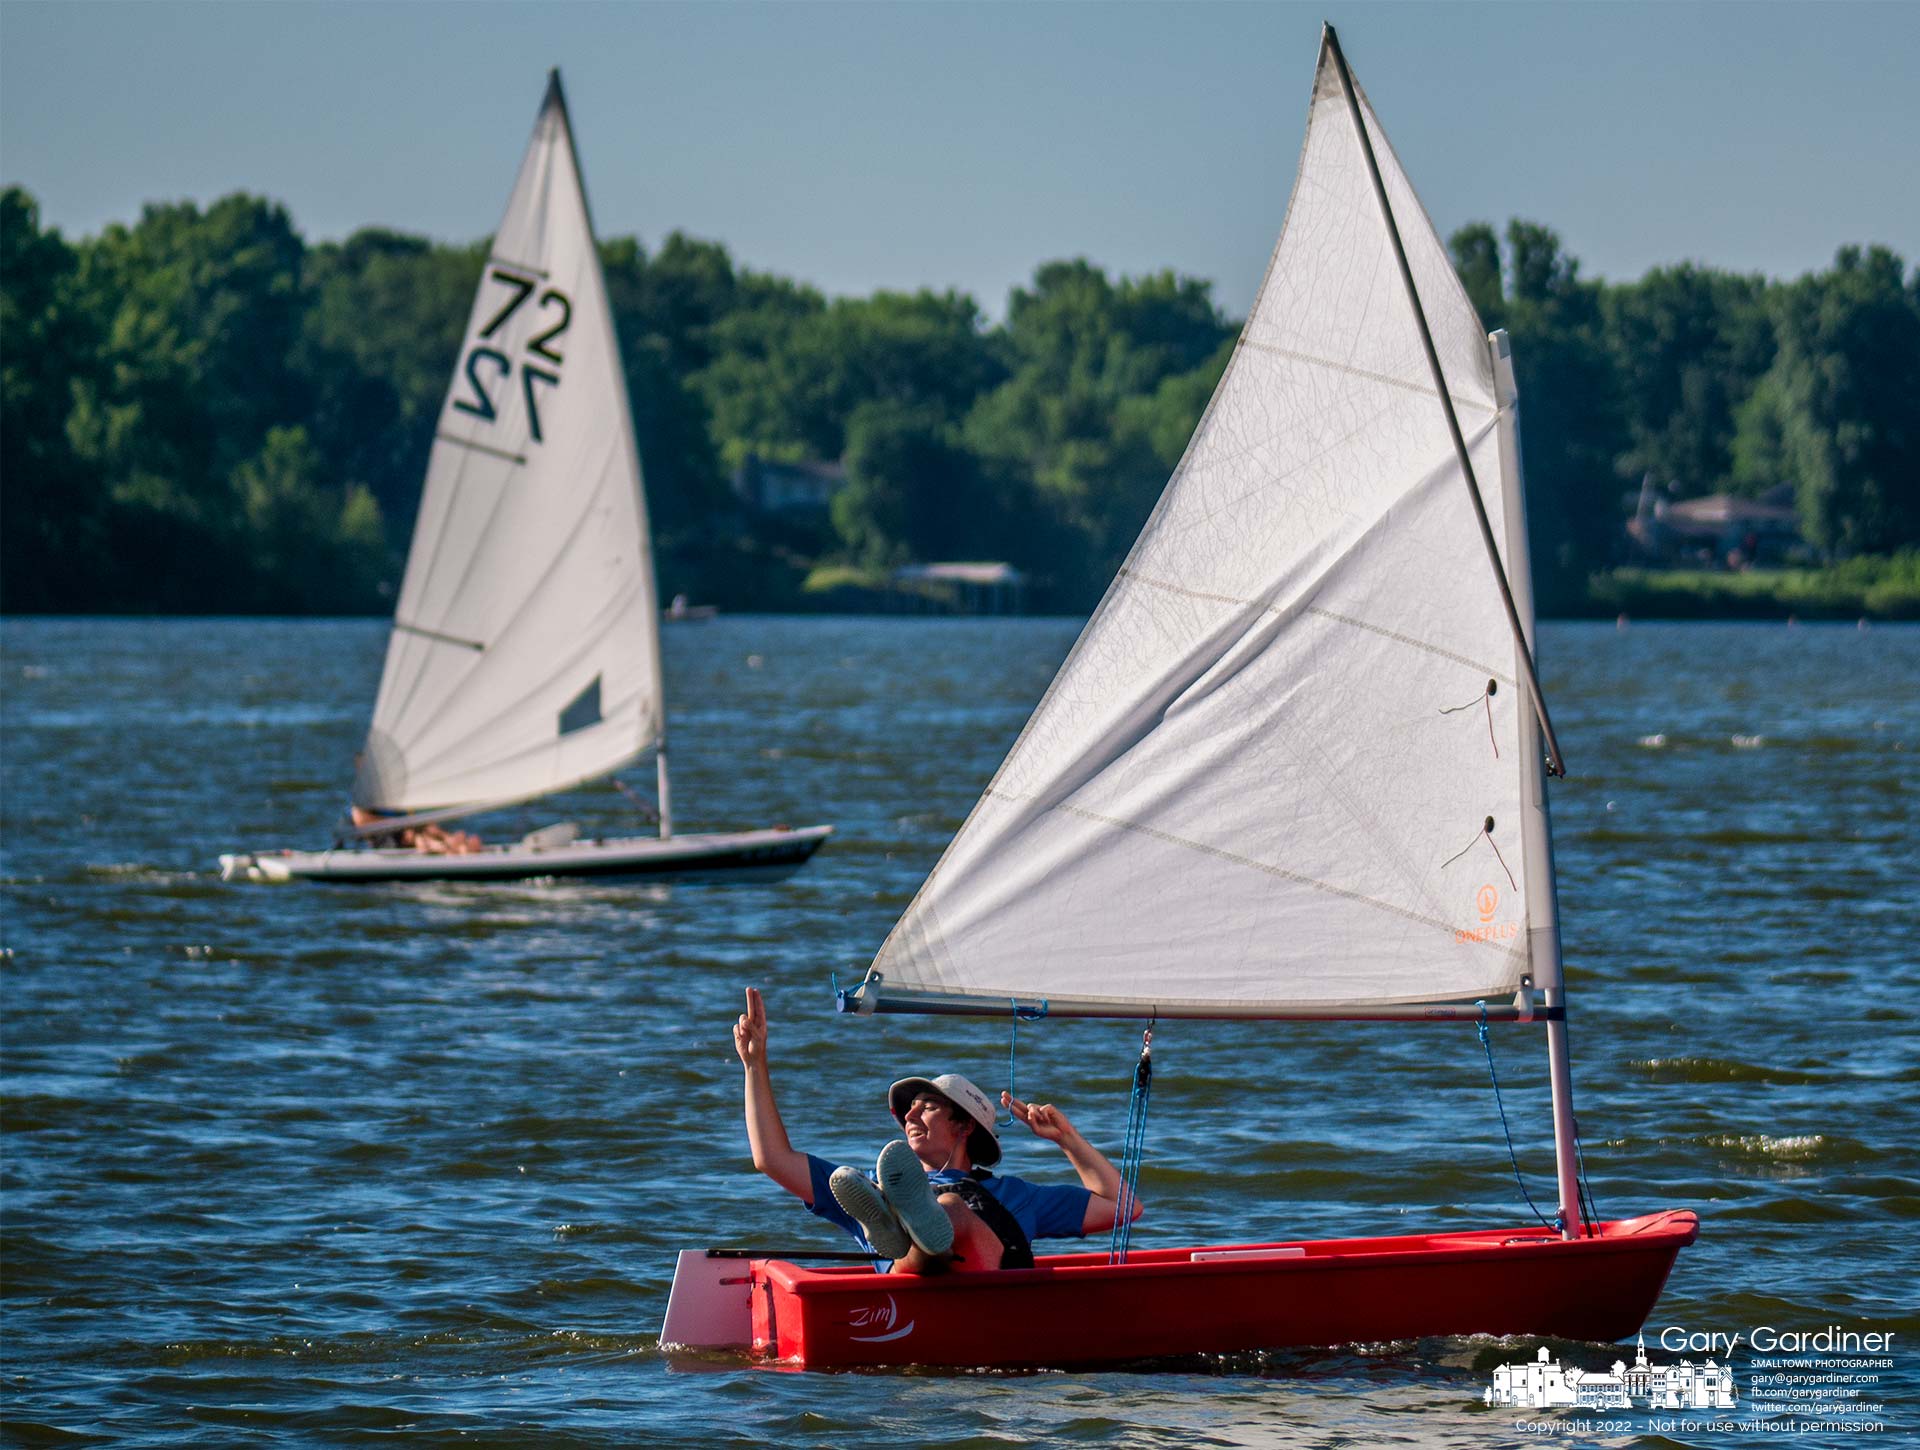 A sailor signals another small sailboat during an afternoon enjoying the waters of Hoover Reservoir. My Final Photo for June 23, 2022.